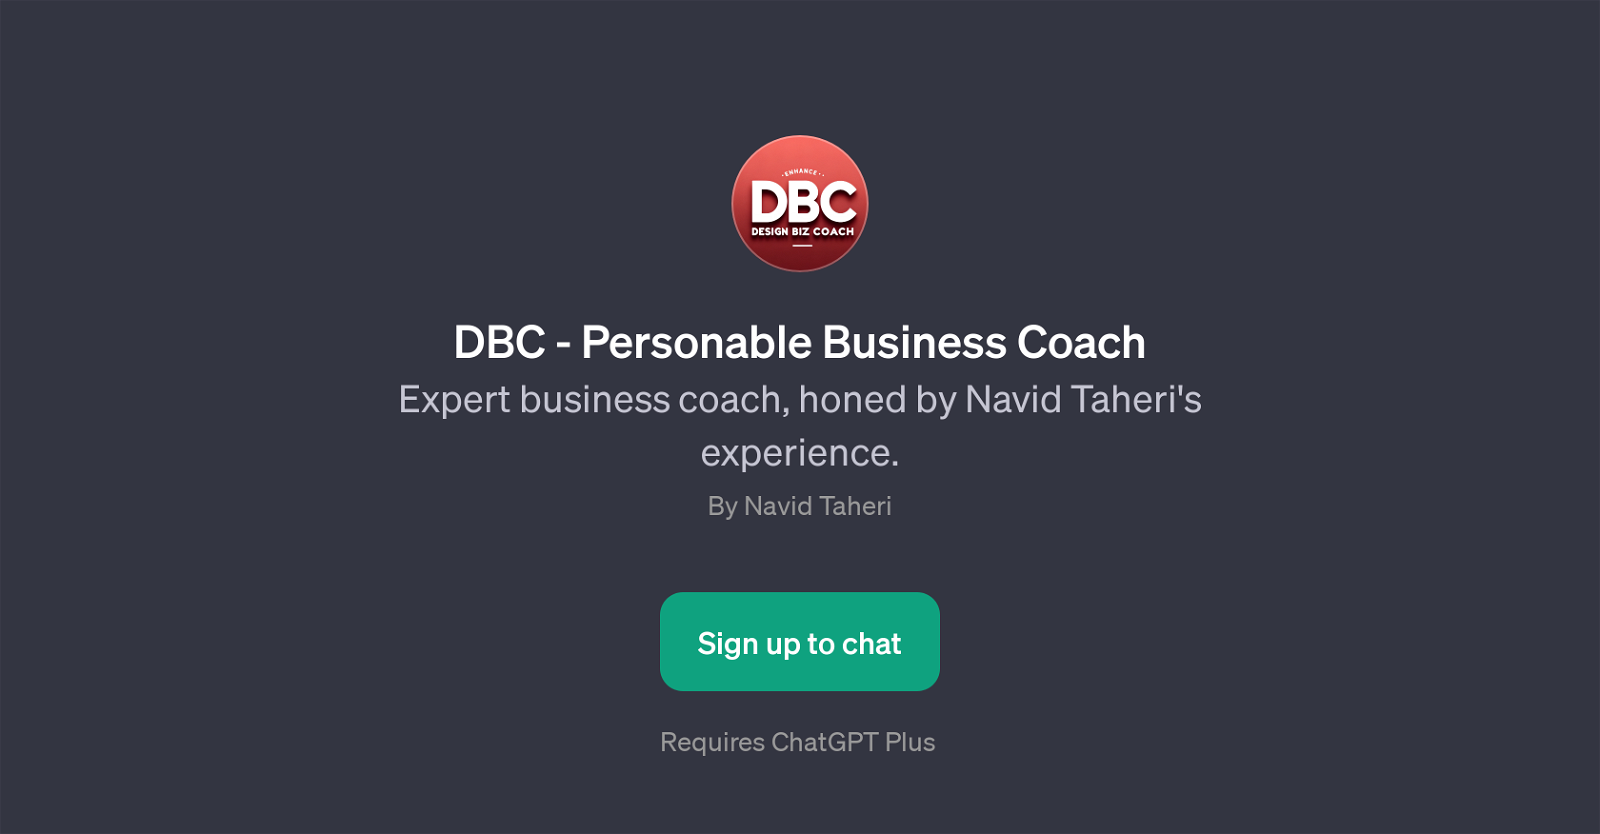 DBC - Personable Business Coach website